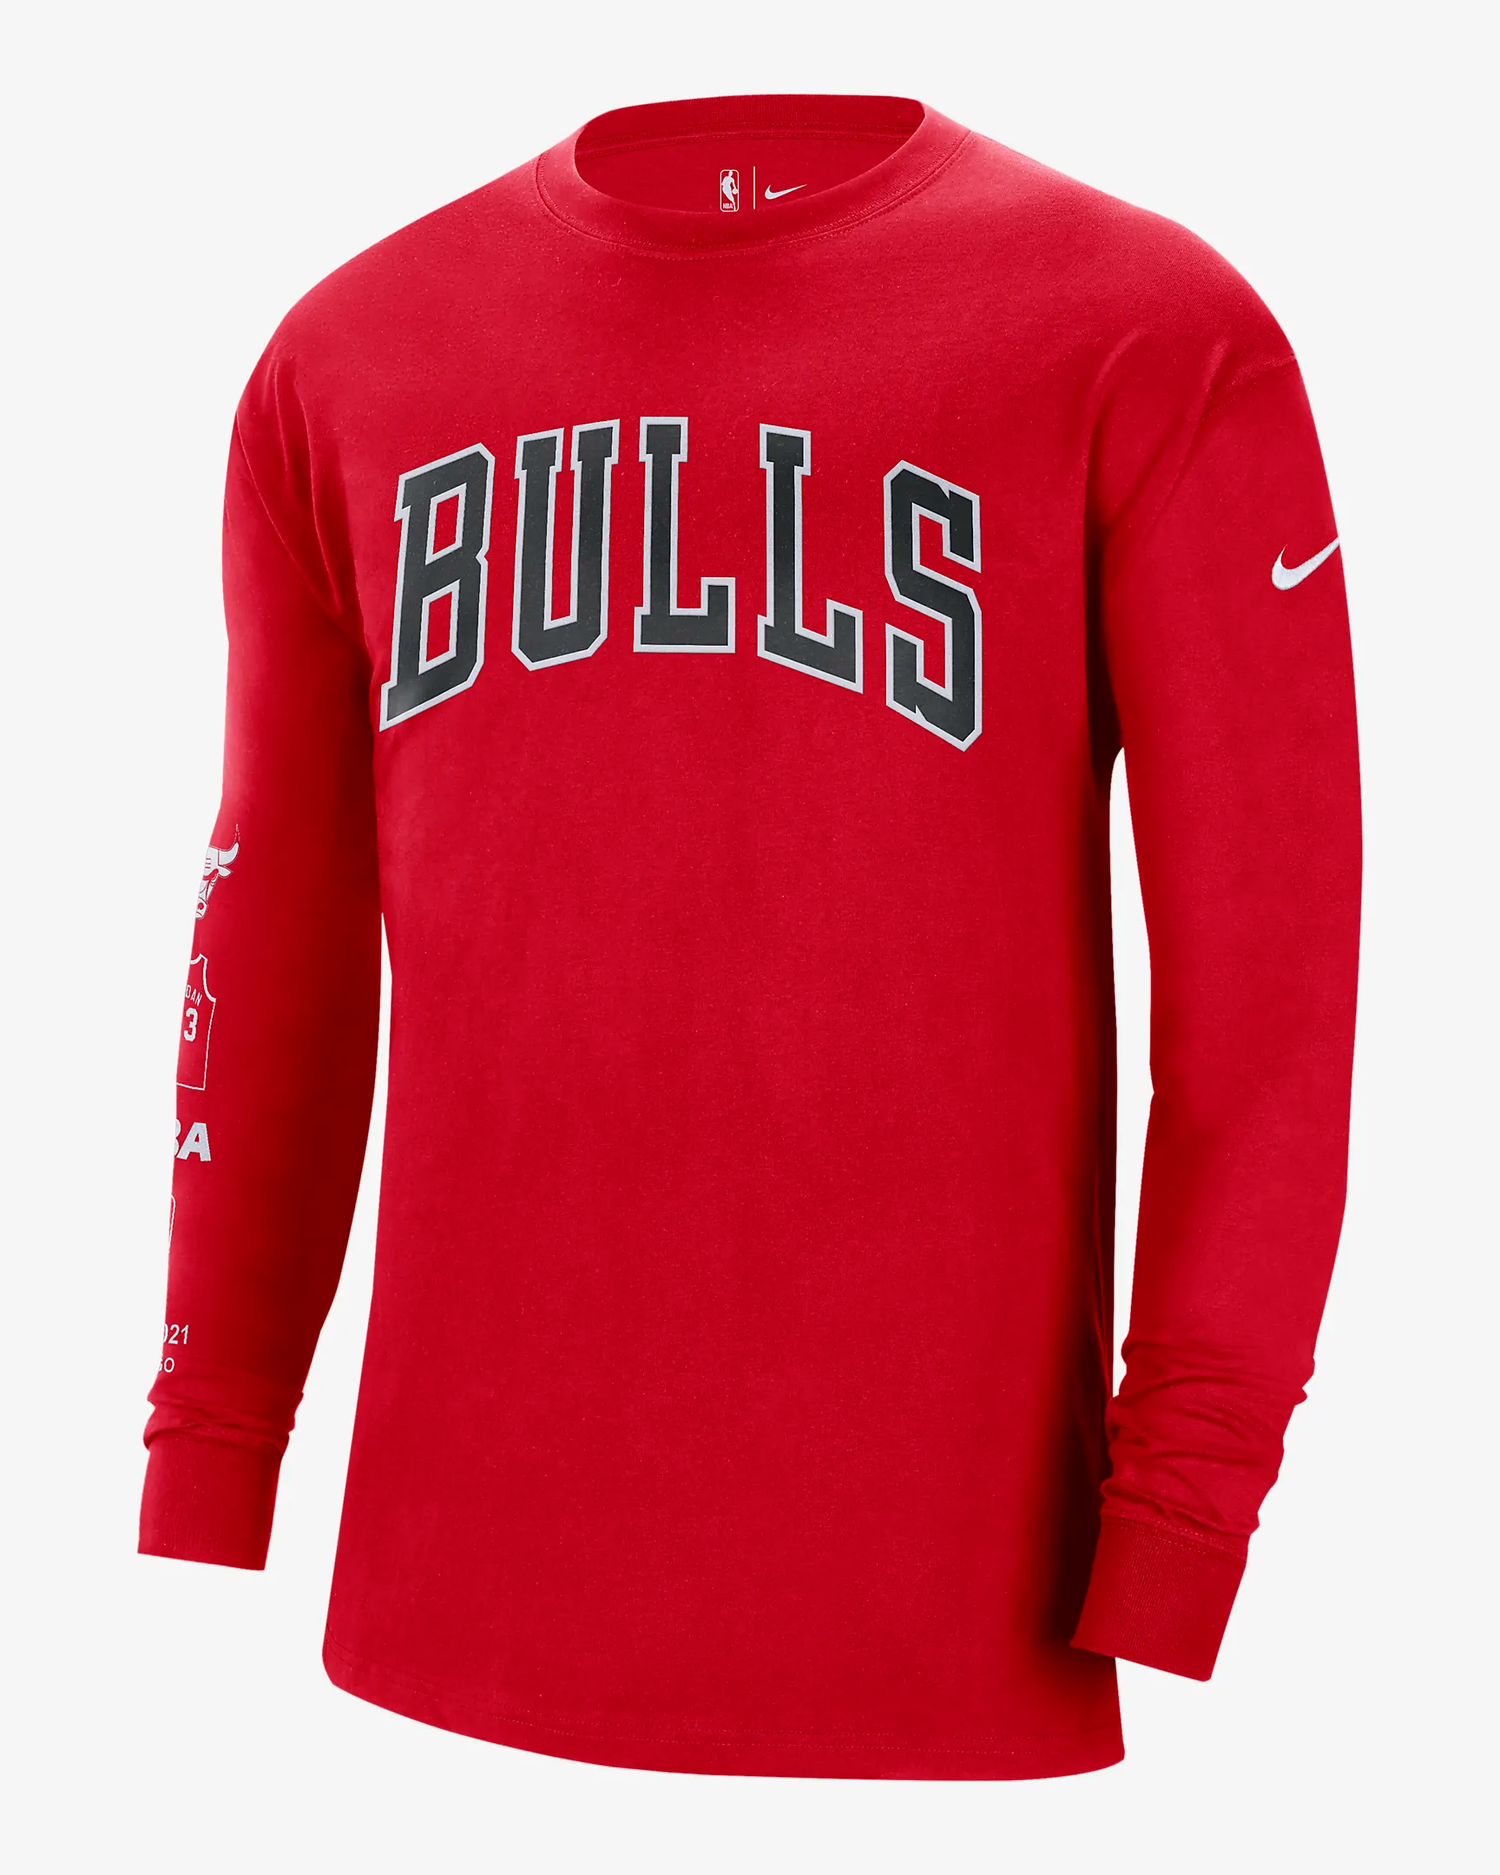 Over 50% OFF the Nike Chicago Bulls Courtside Shirt — Sneaker Shouts